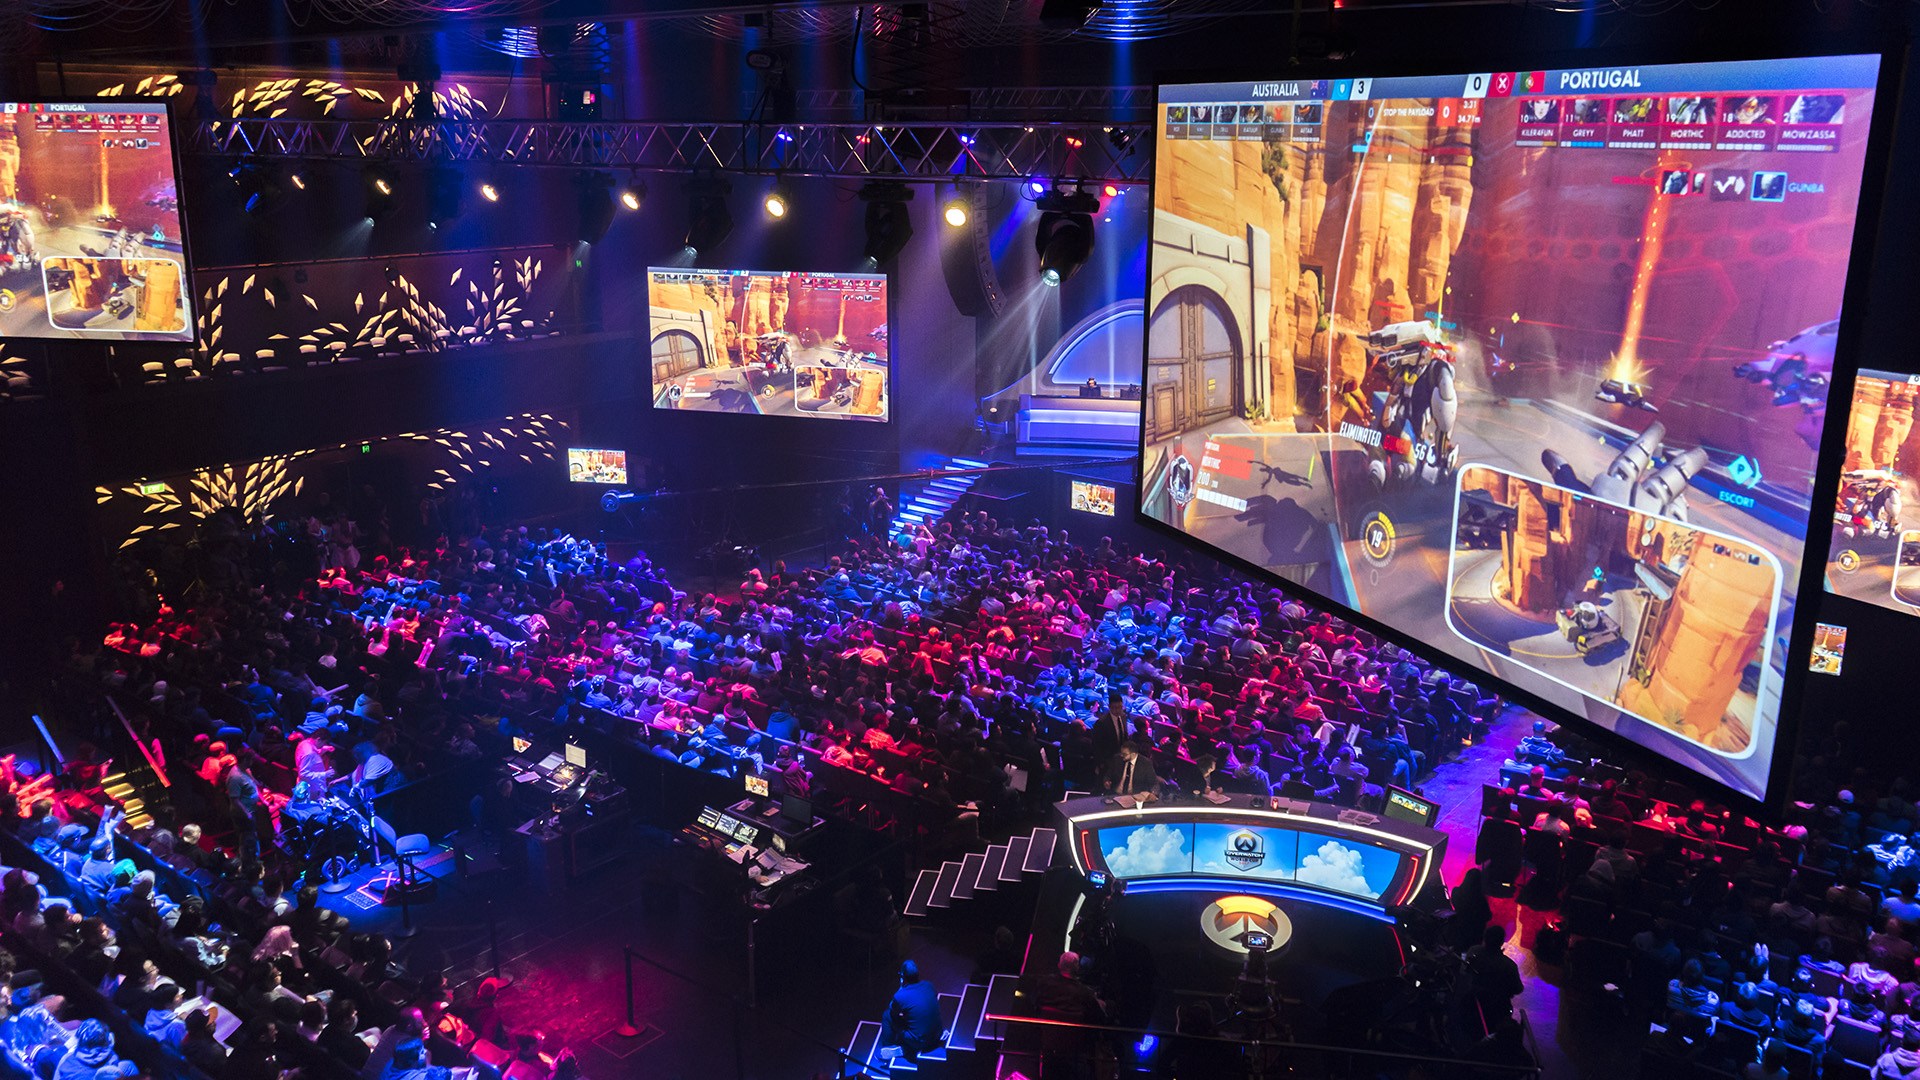 Overwatch World Cup - Why There Are No International Rivalries